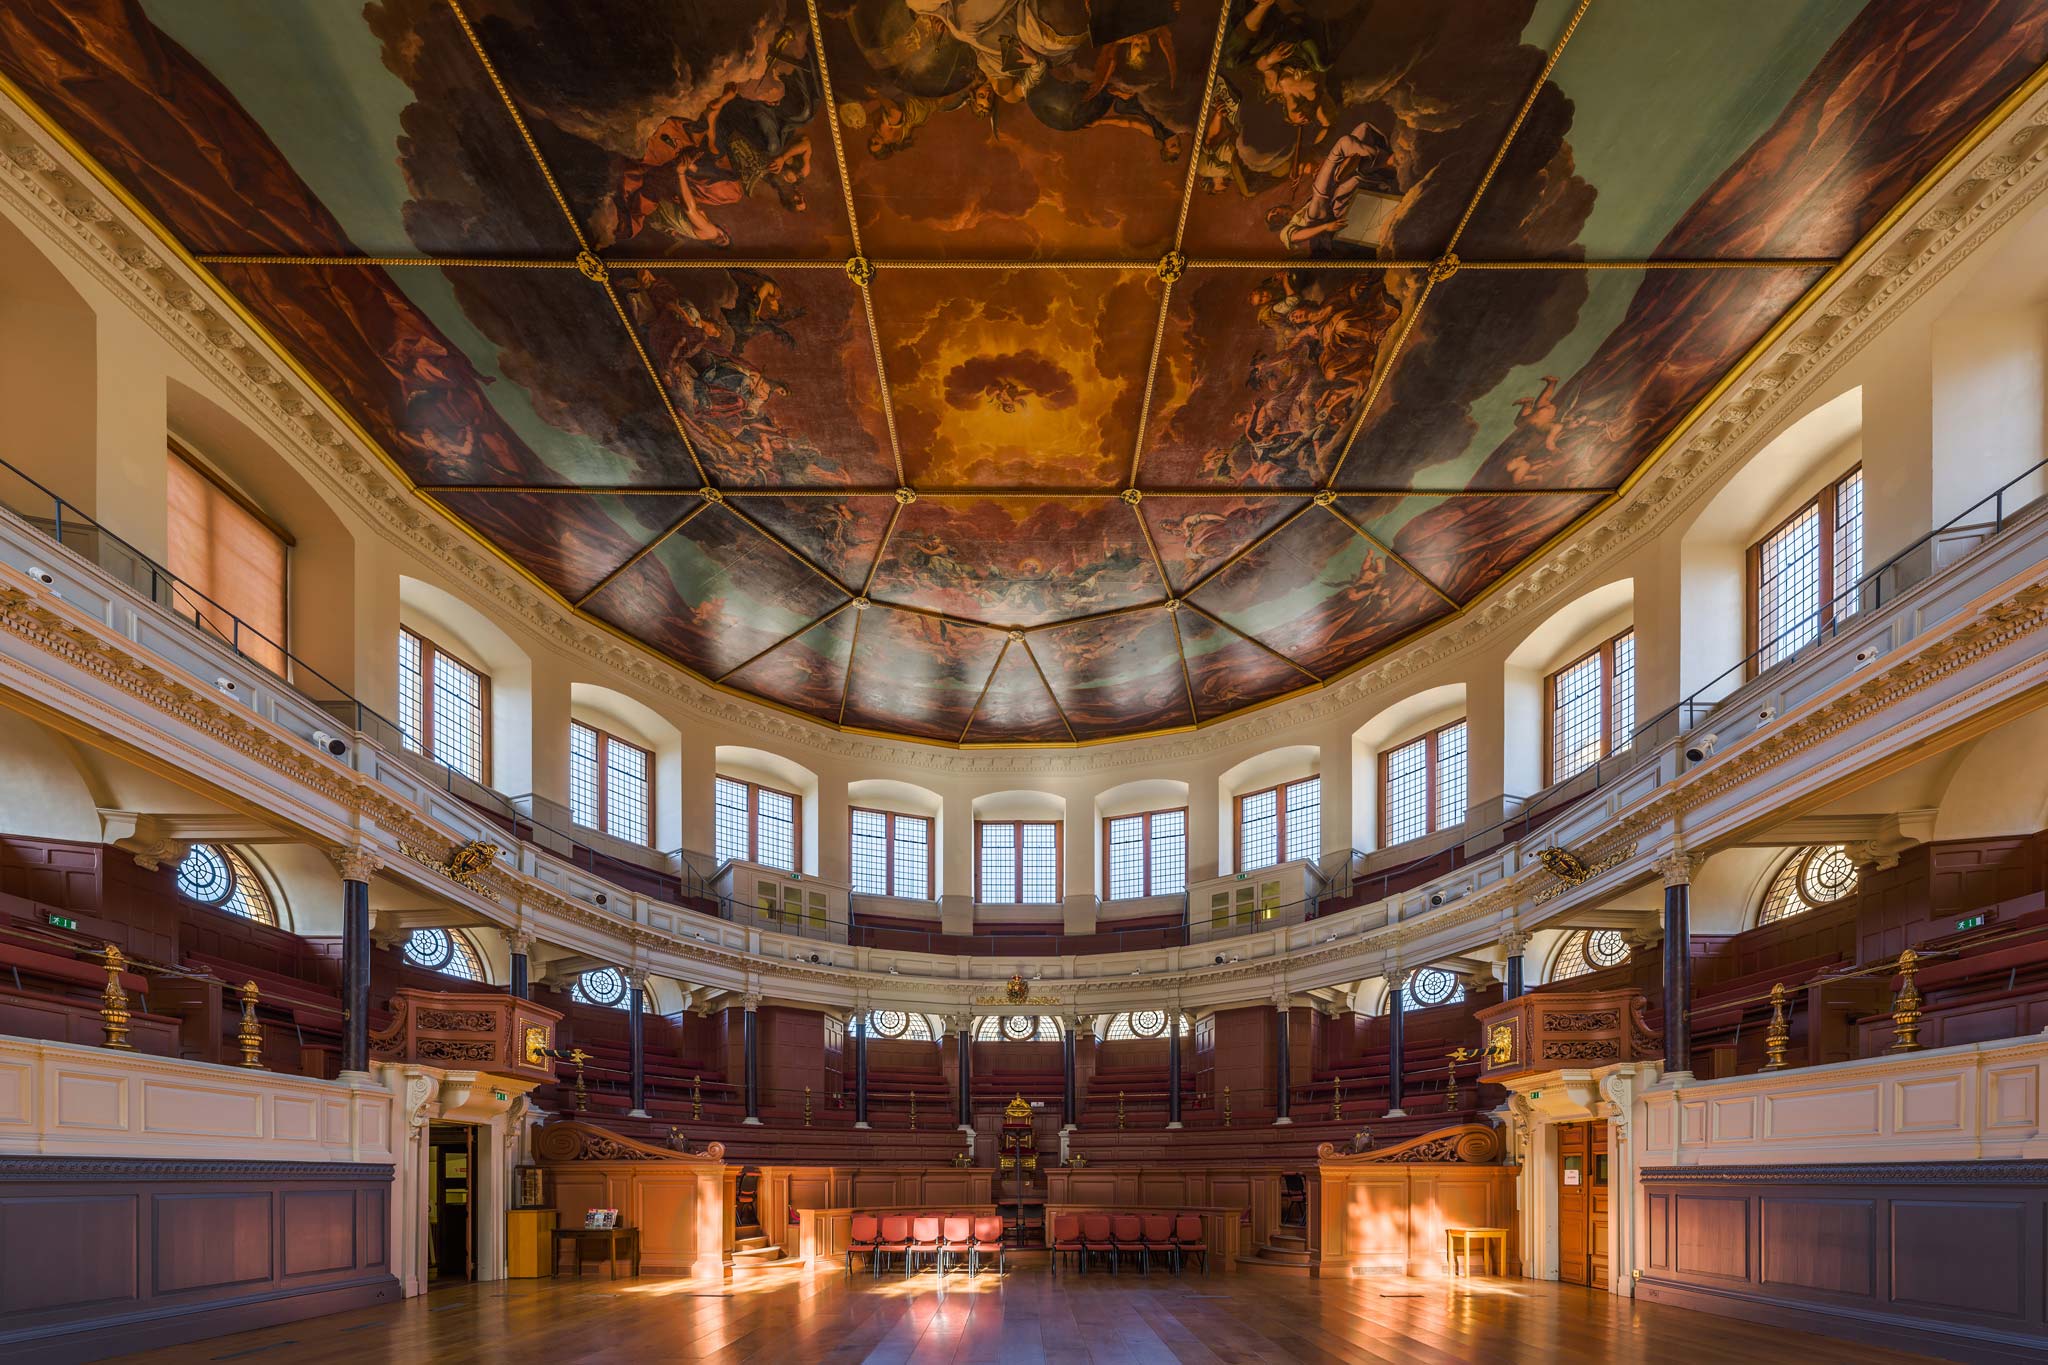 The Sheldonian Theatre - Things to See & Do in Oxford